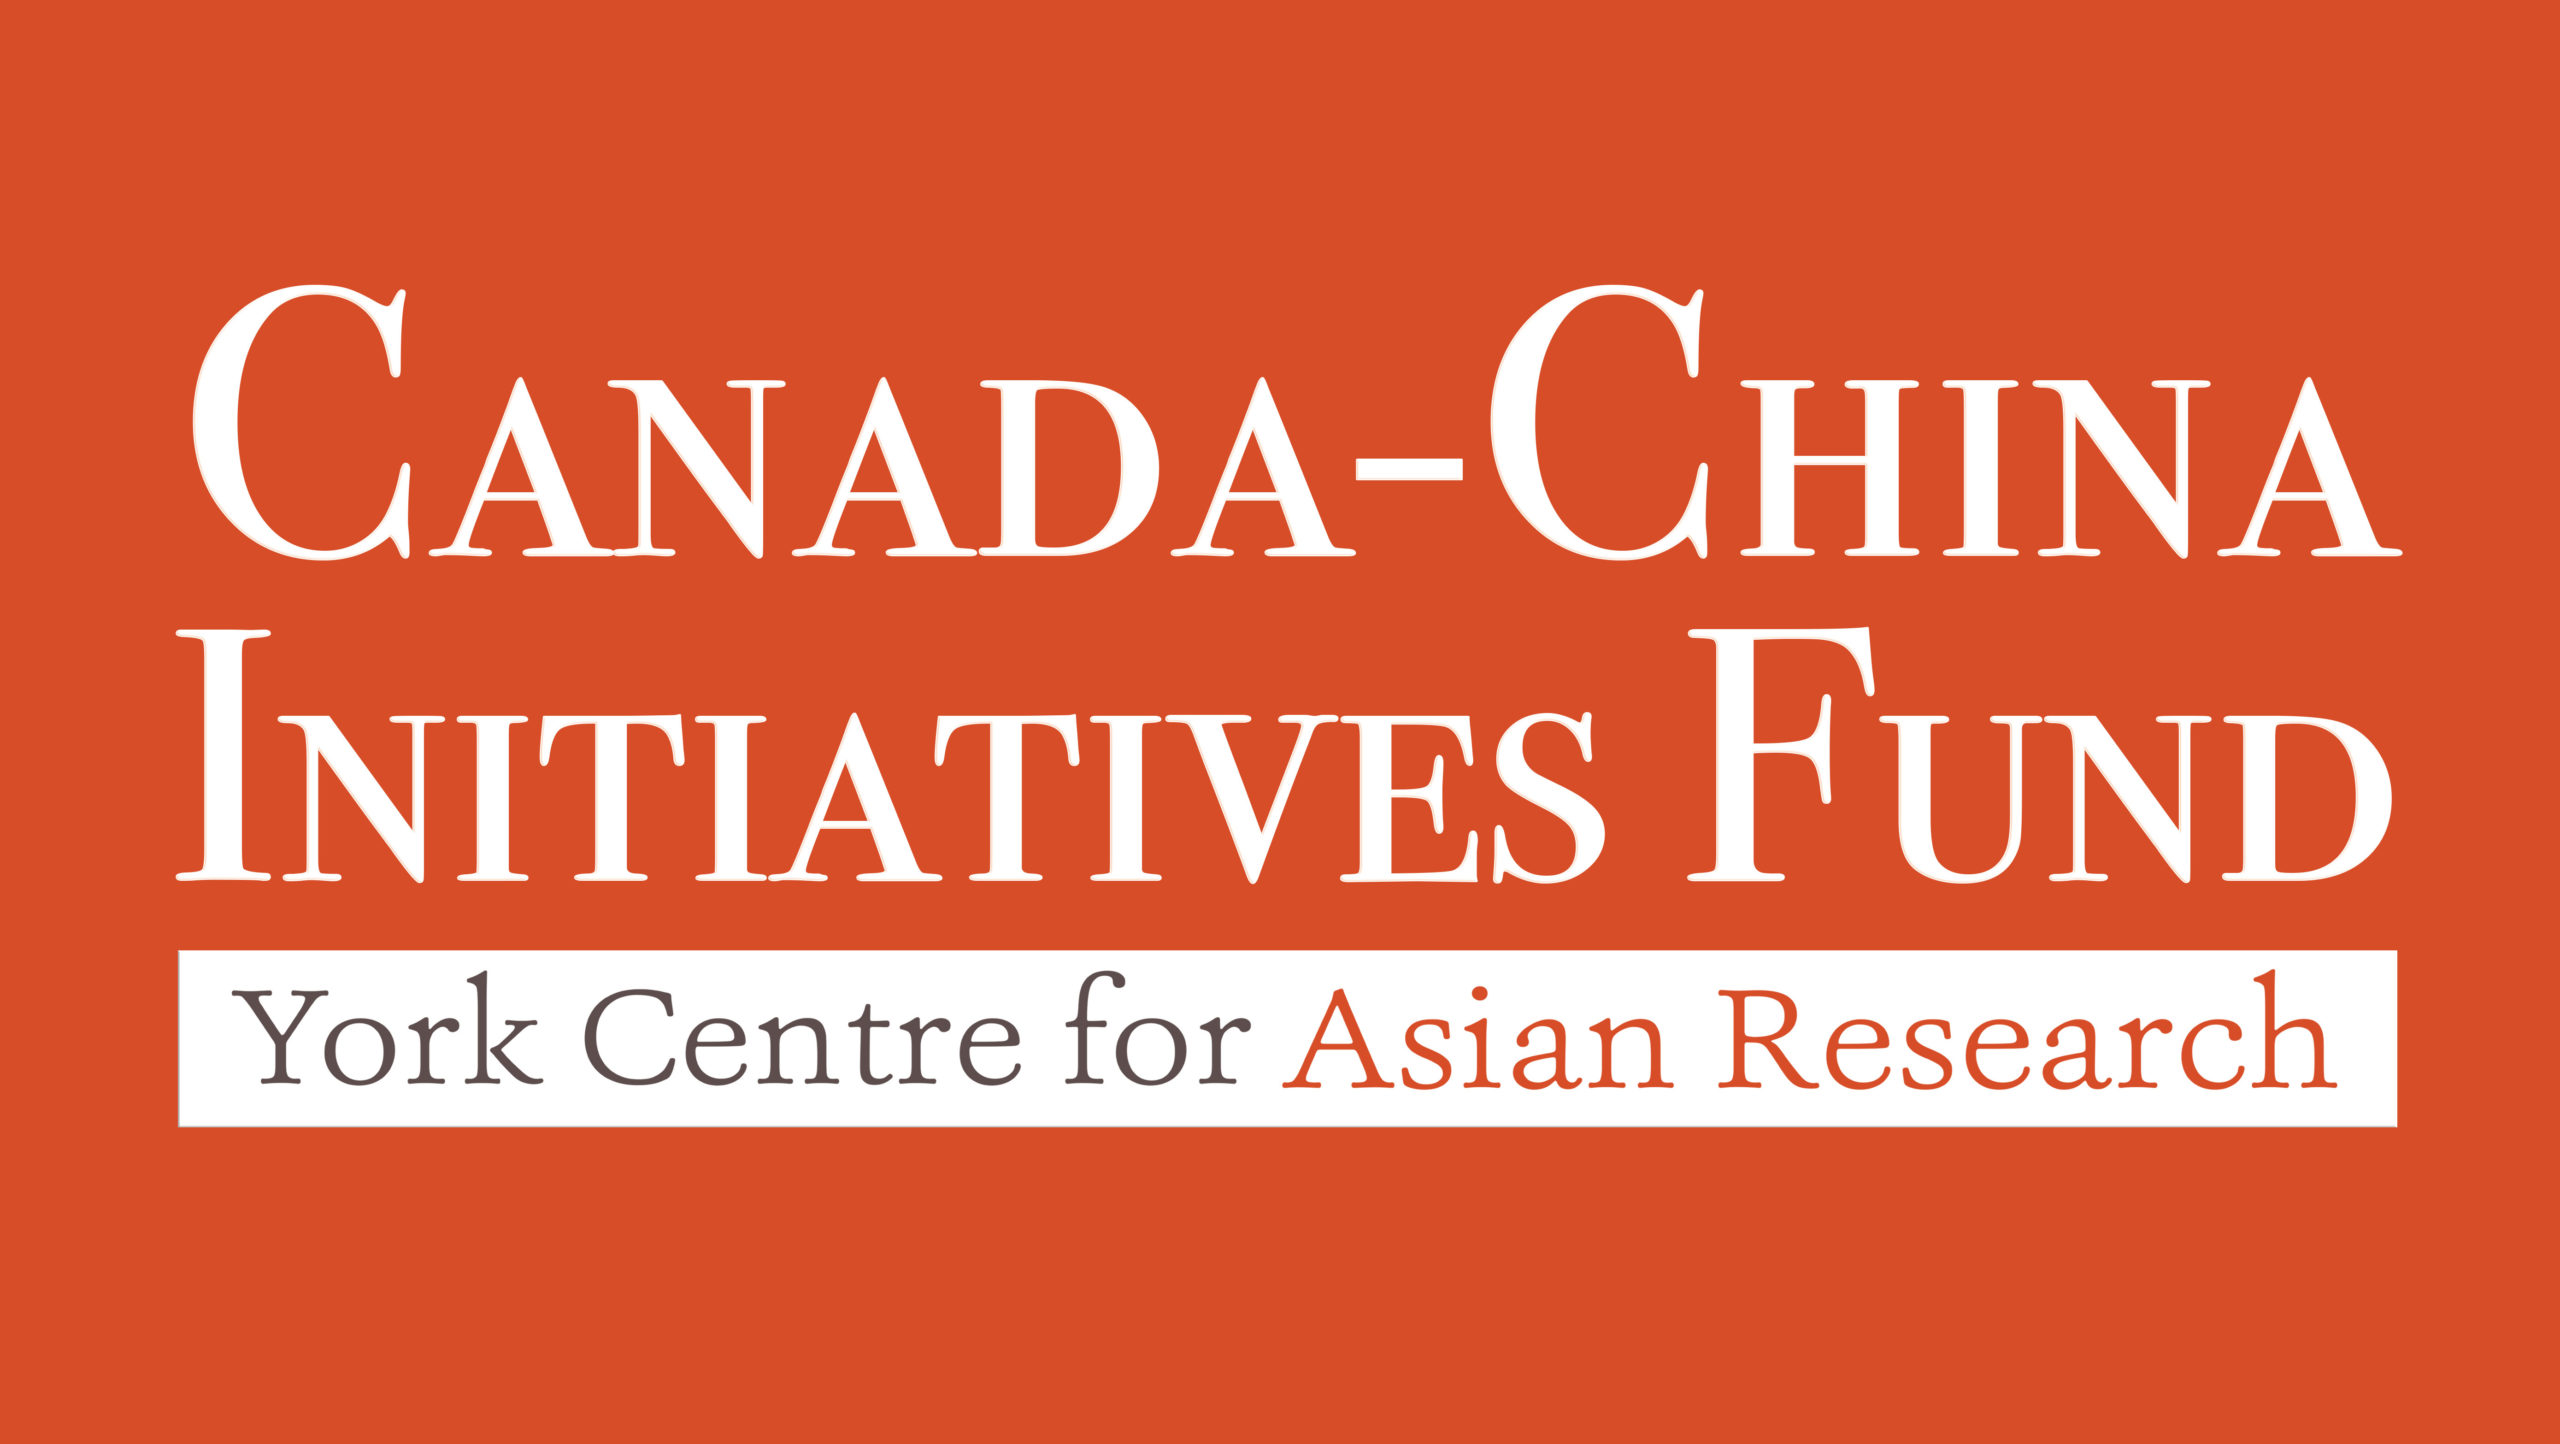 Latest CCIF-funded projects focus on gender, urbanization and identity in the Greater China Region, the diaspora in Canada